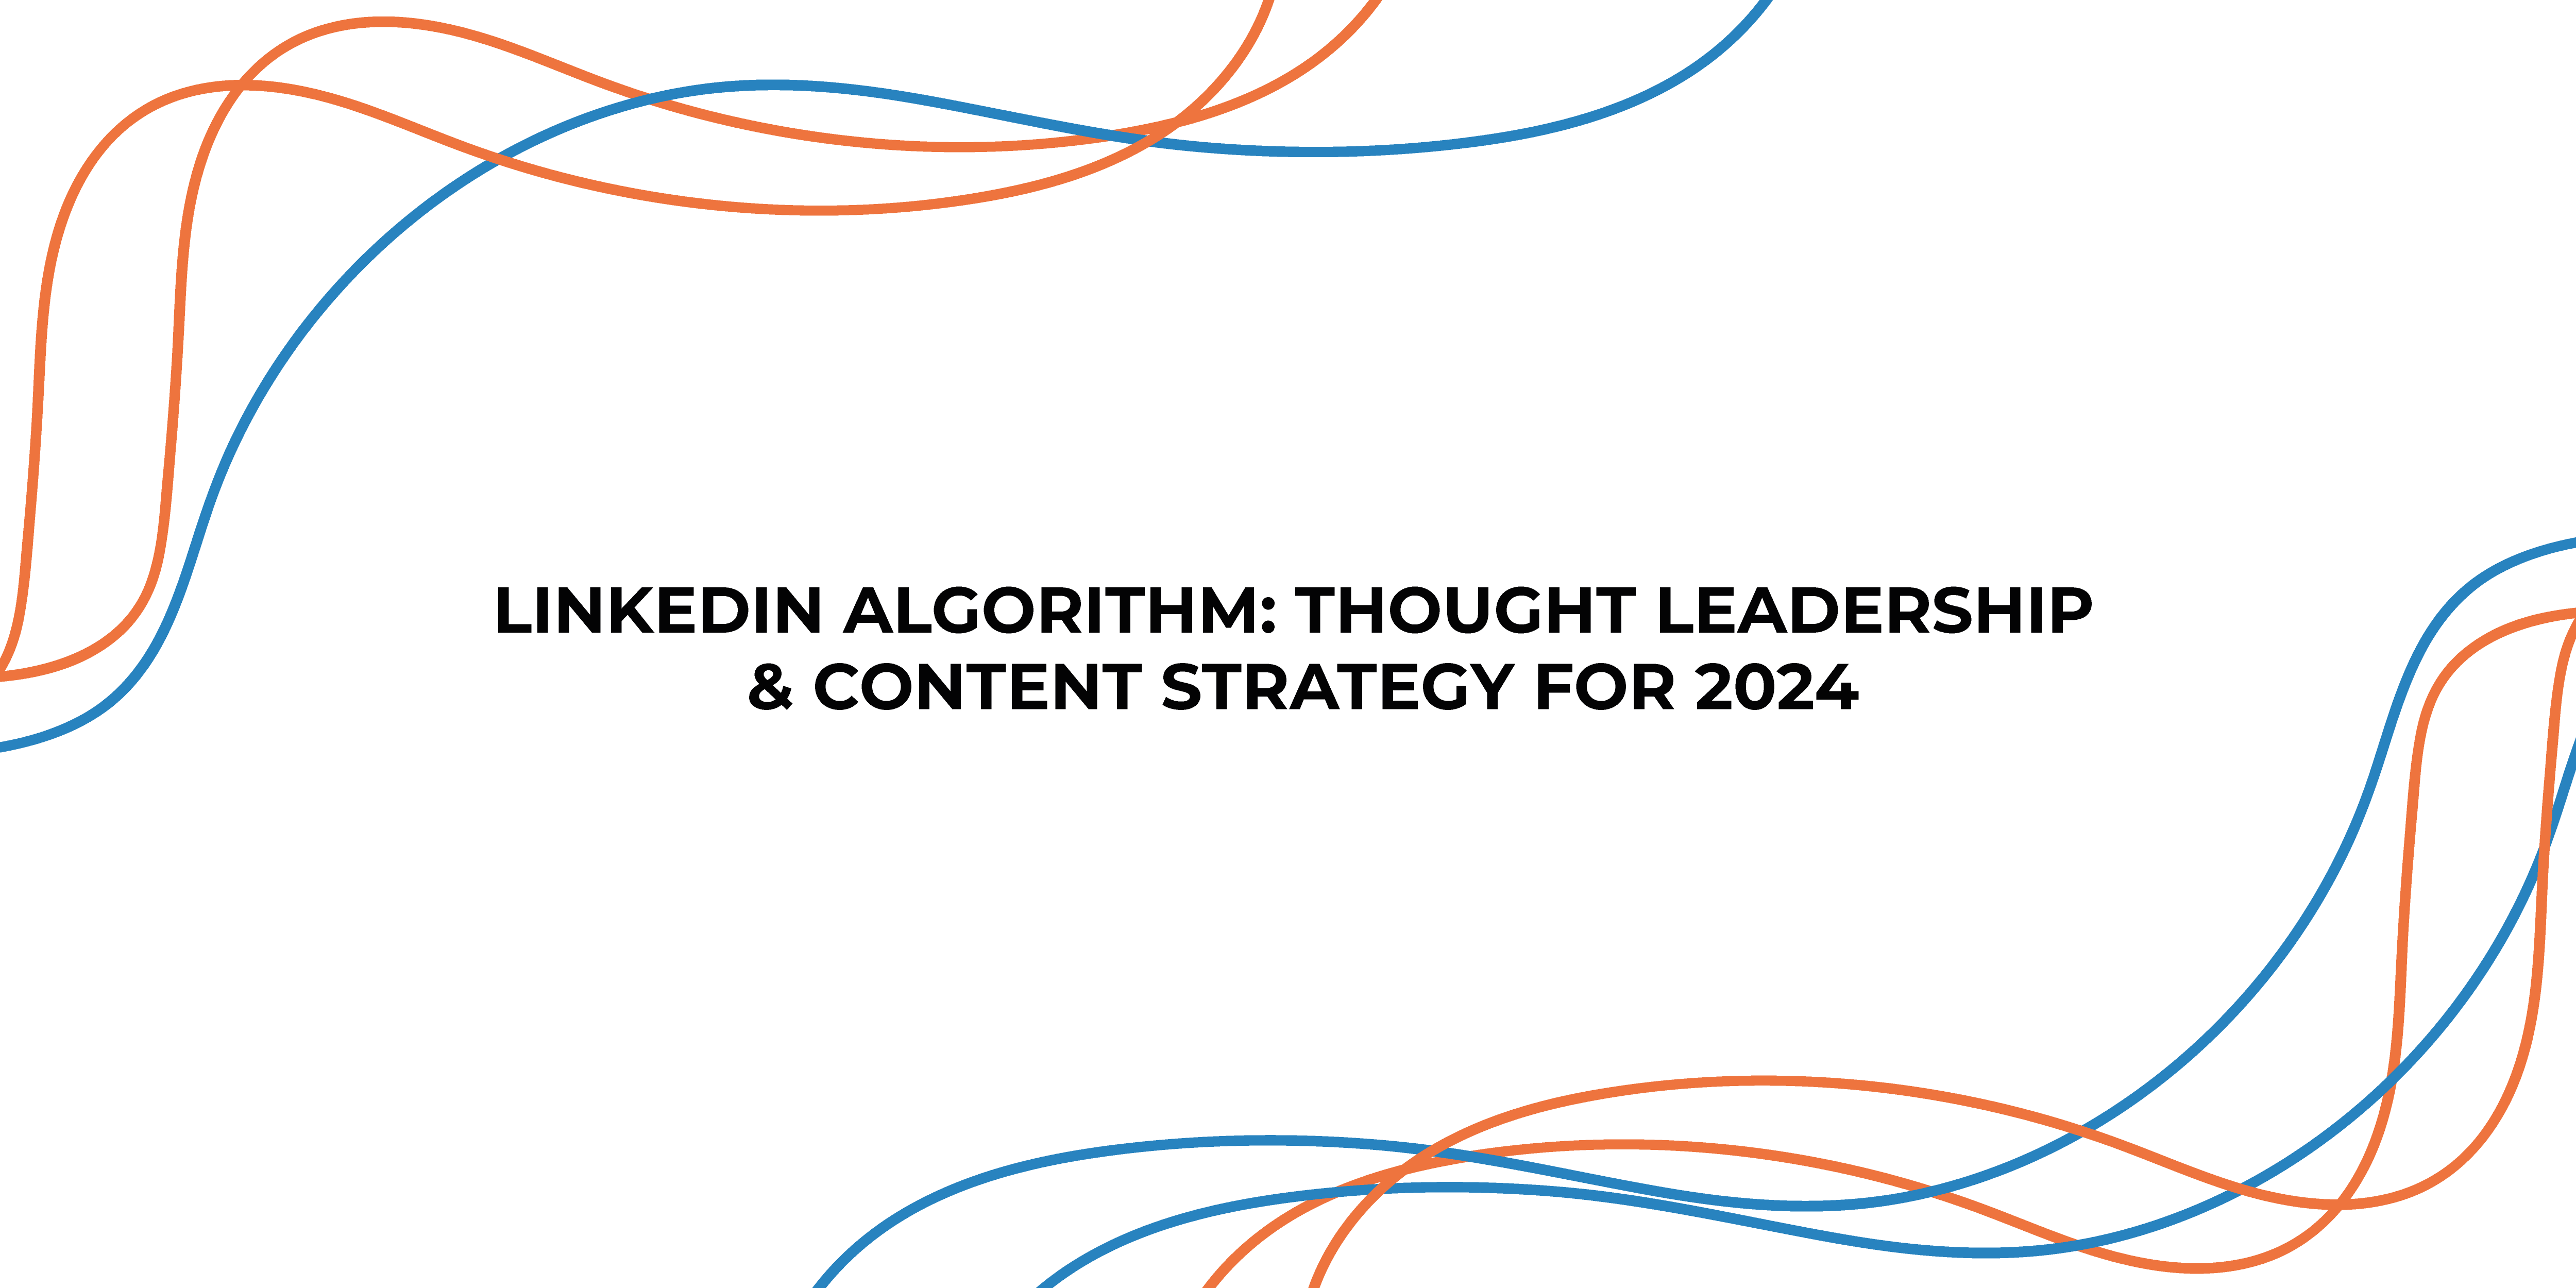 LinkedIn Algorithm: Thought Leadership & Content Strategy for 2024